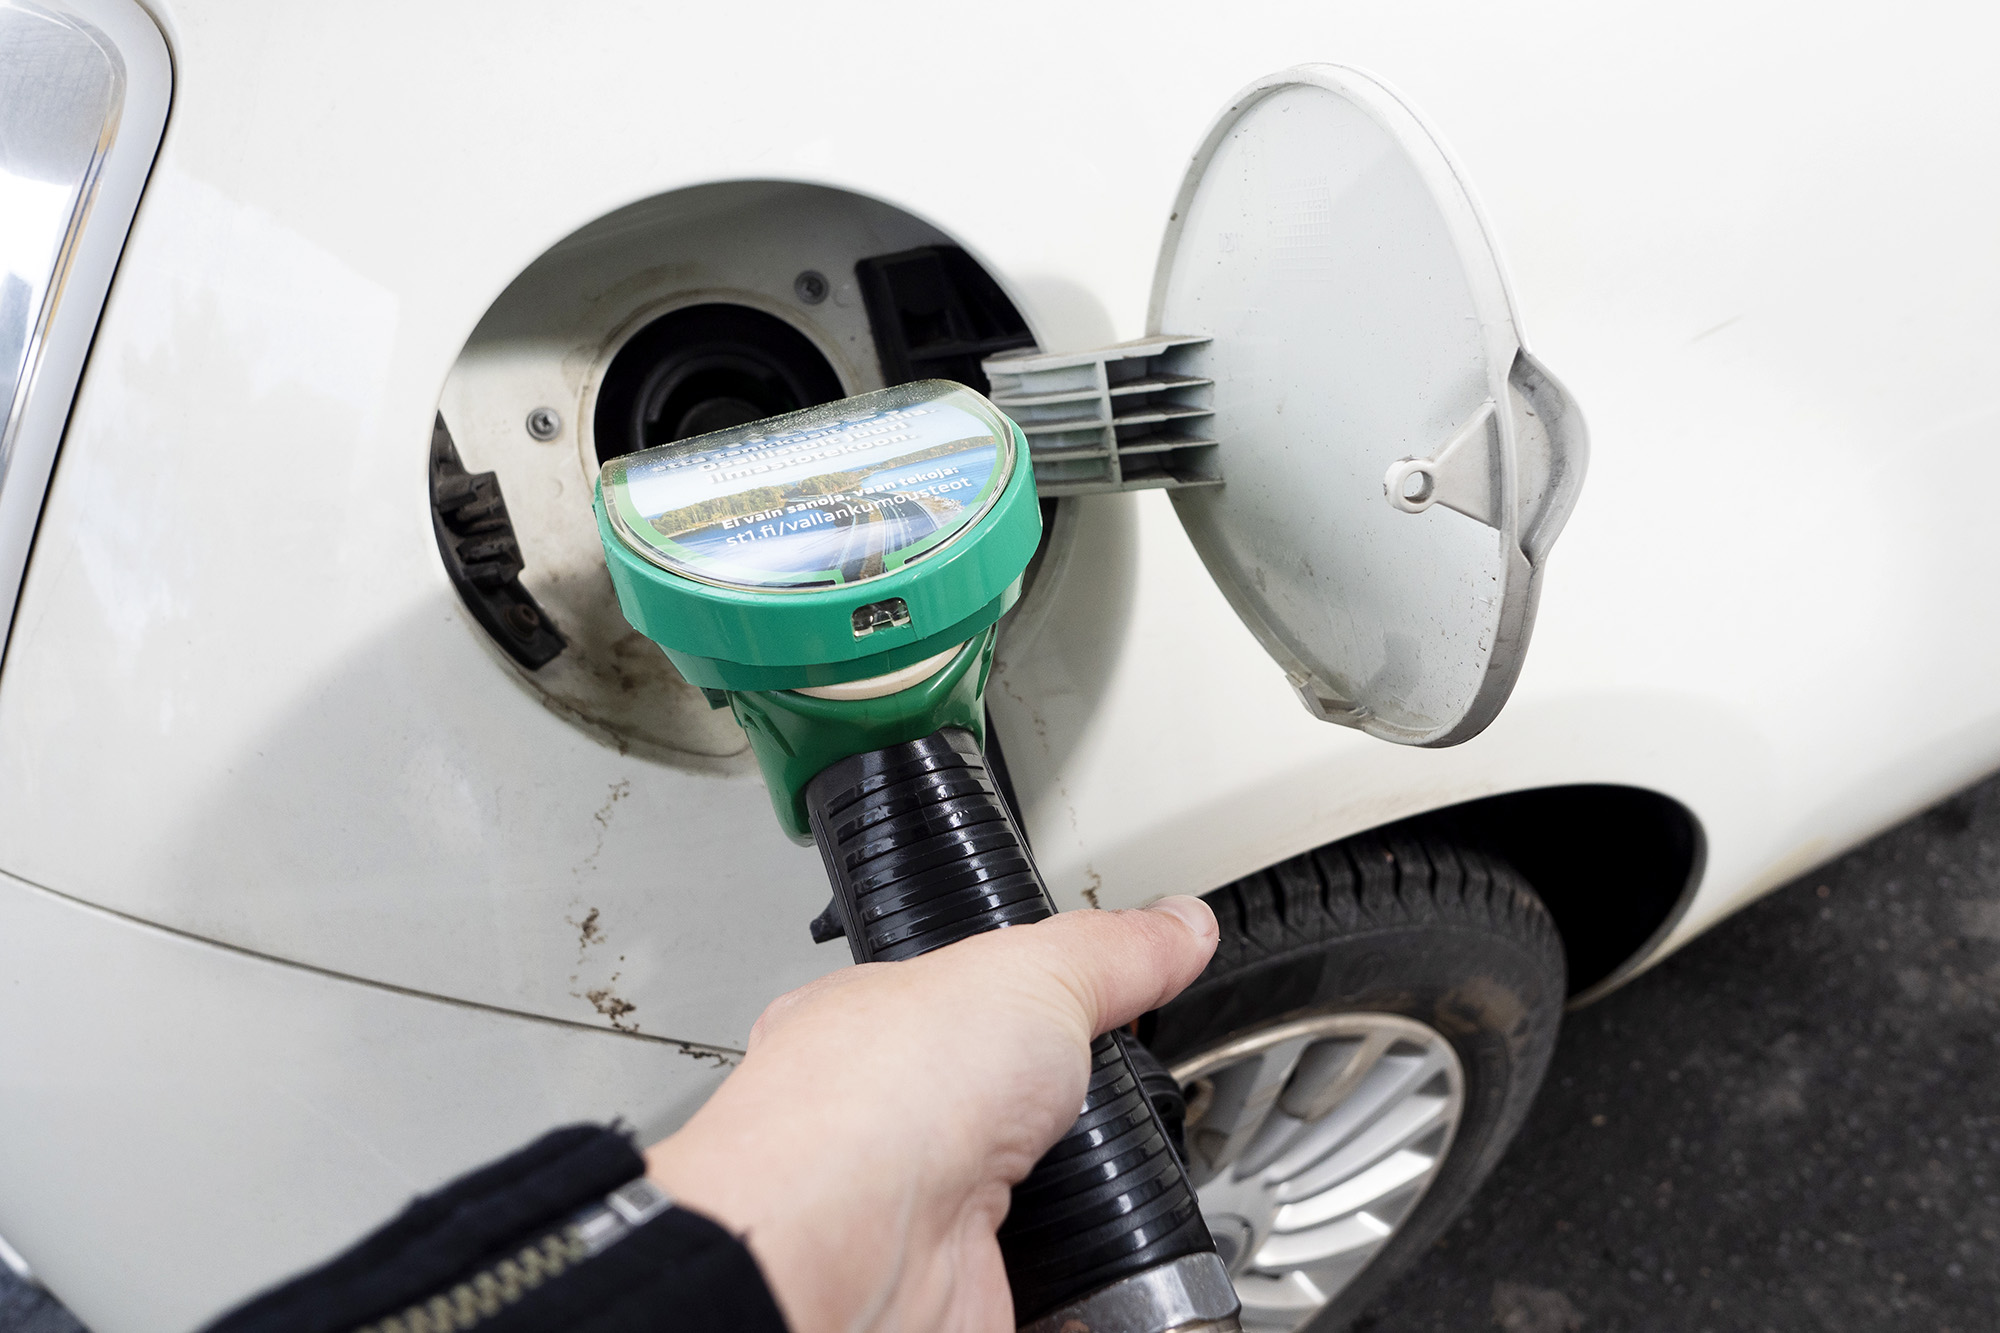 Inflation is accelerating again as fuel prices rise